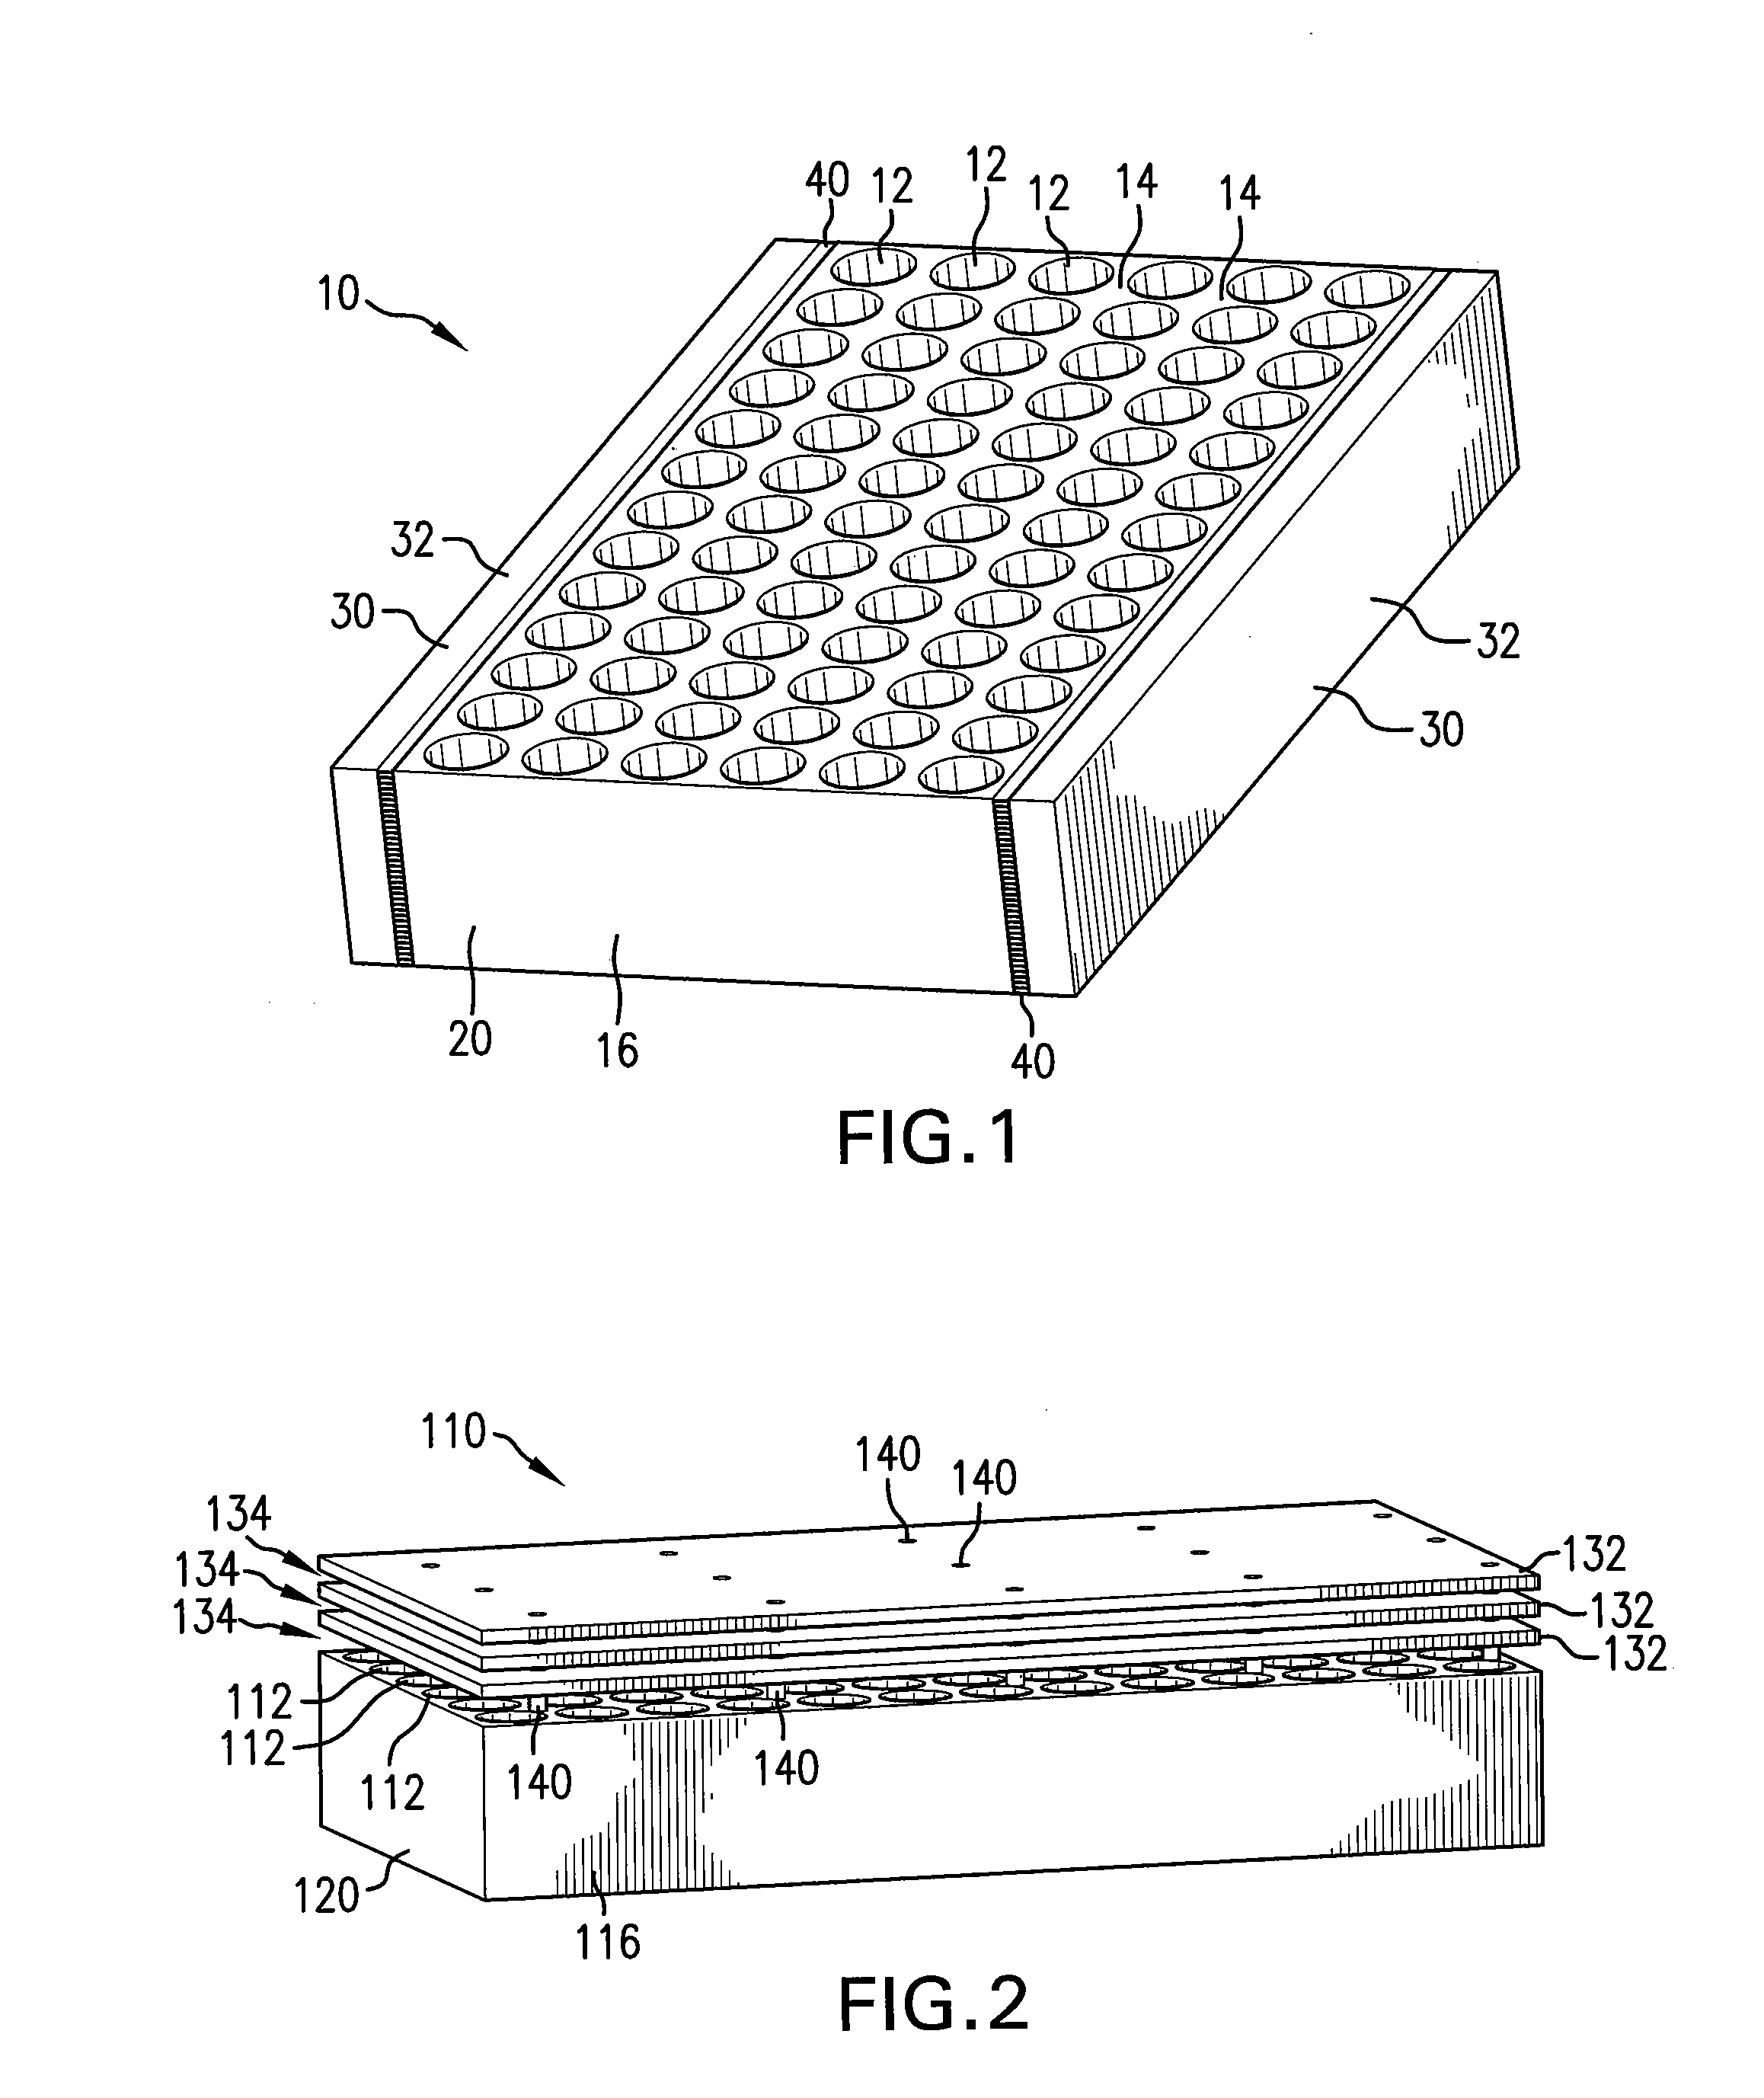 Energy storage thermal management system using multi-temperature phase change materials